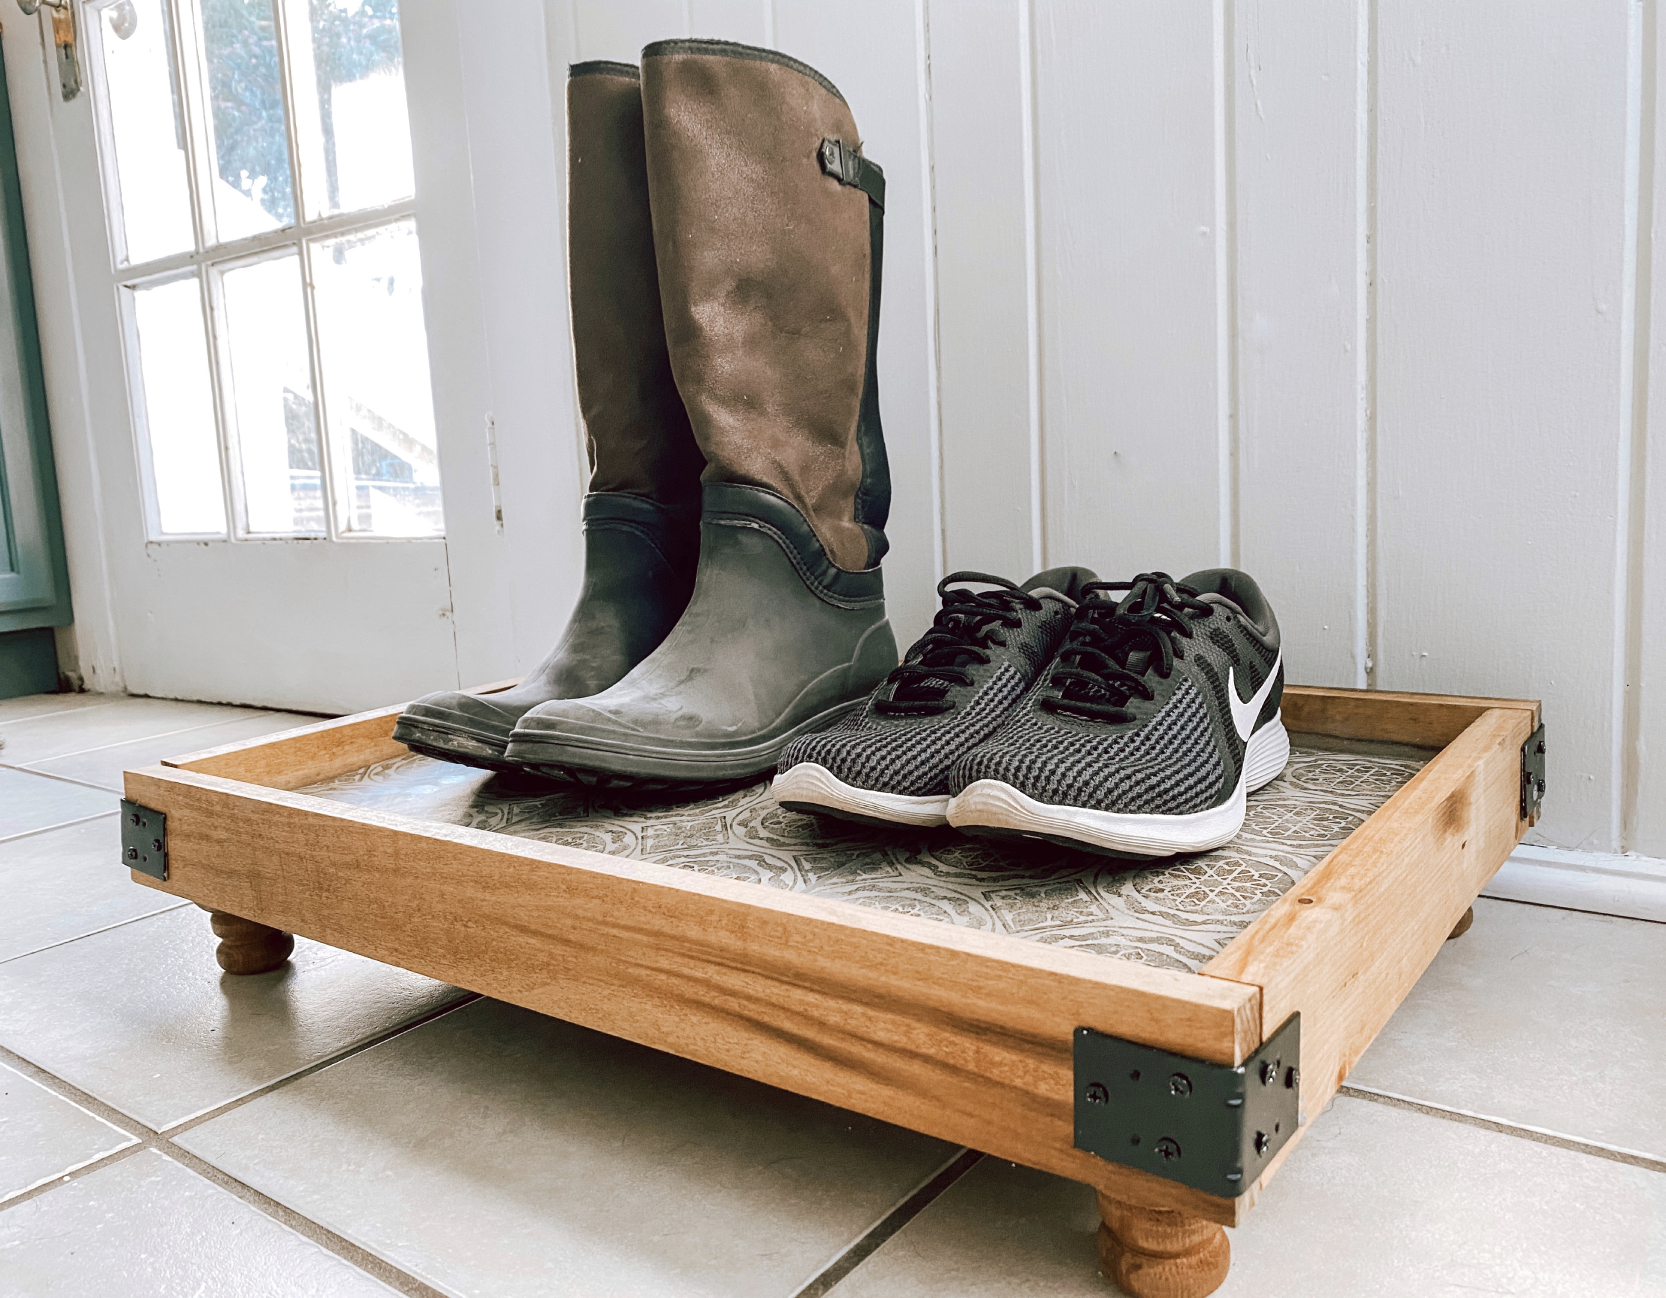 16 boot trays to keep your shoes from making a mess